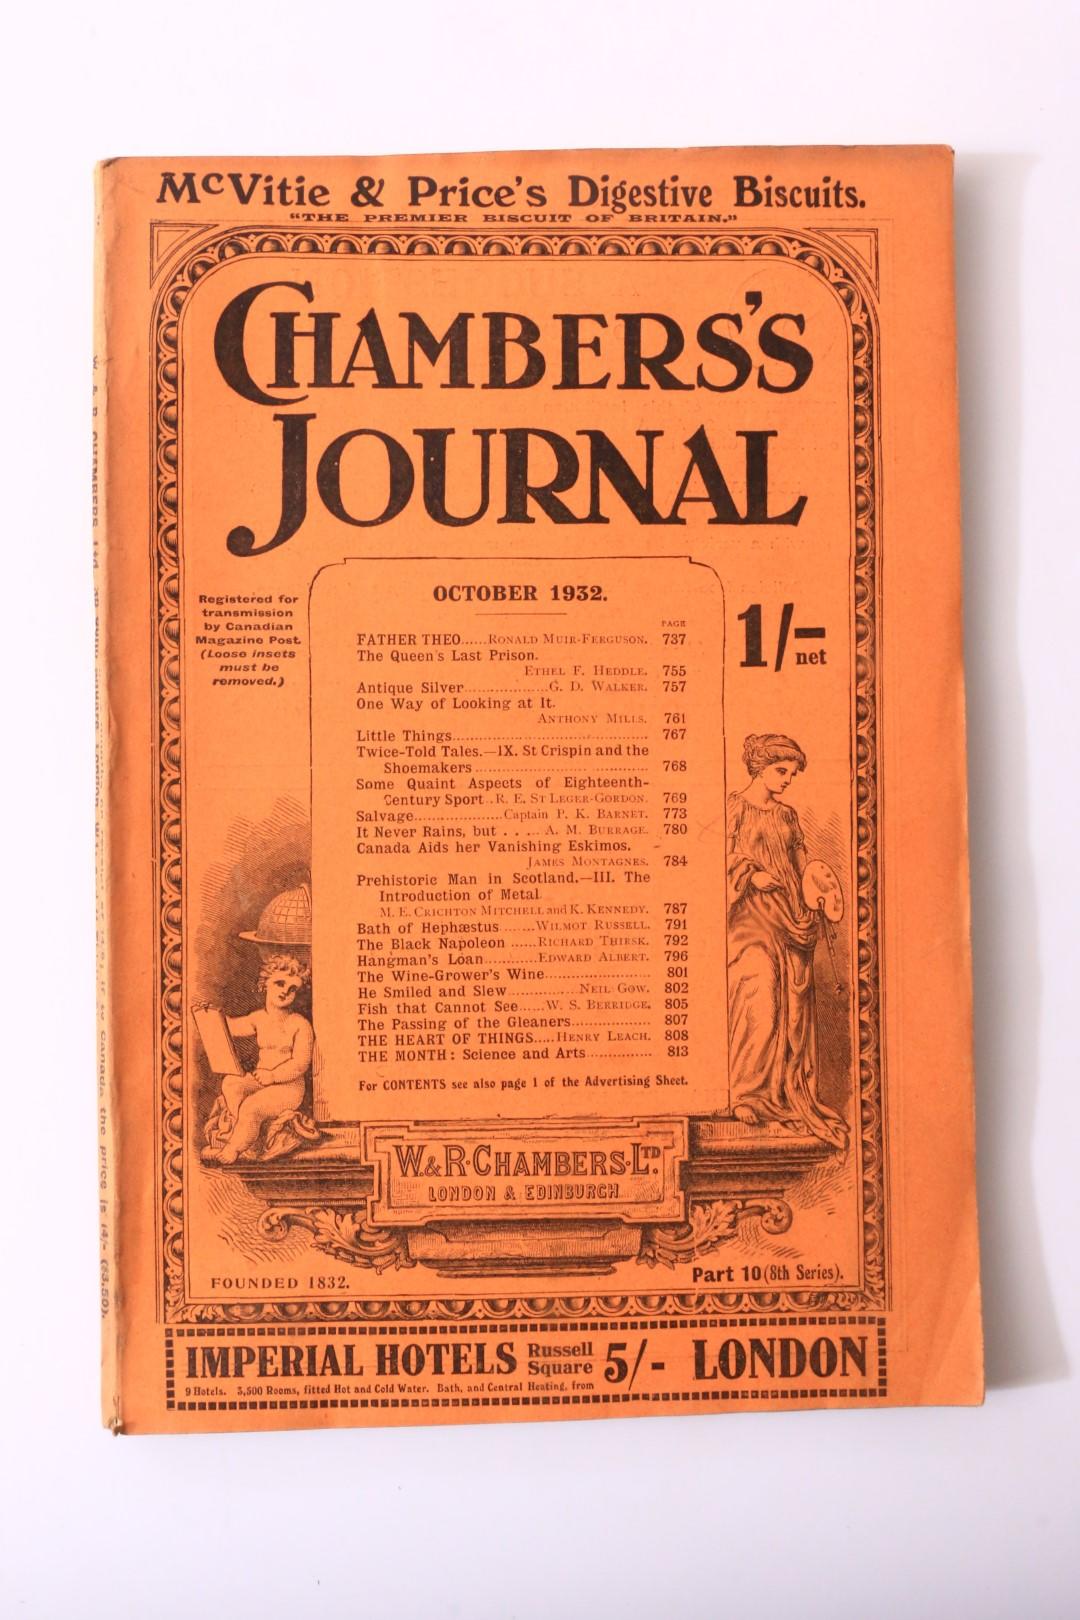 A.M. Burrage [and others] - Chambers's Journal, October 1932 - W & R Chambers, 1932, First Edition.